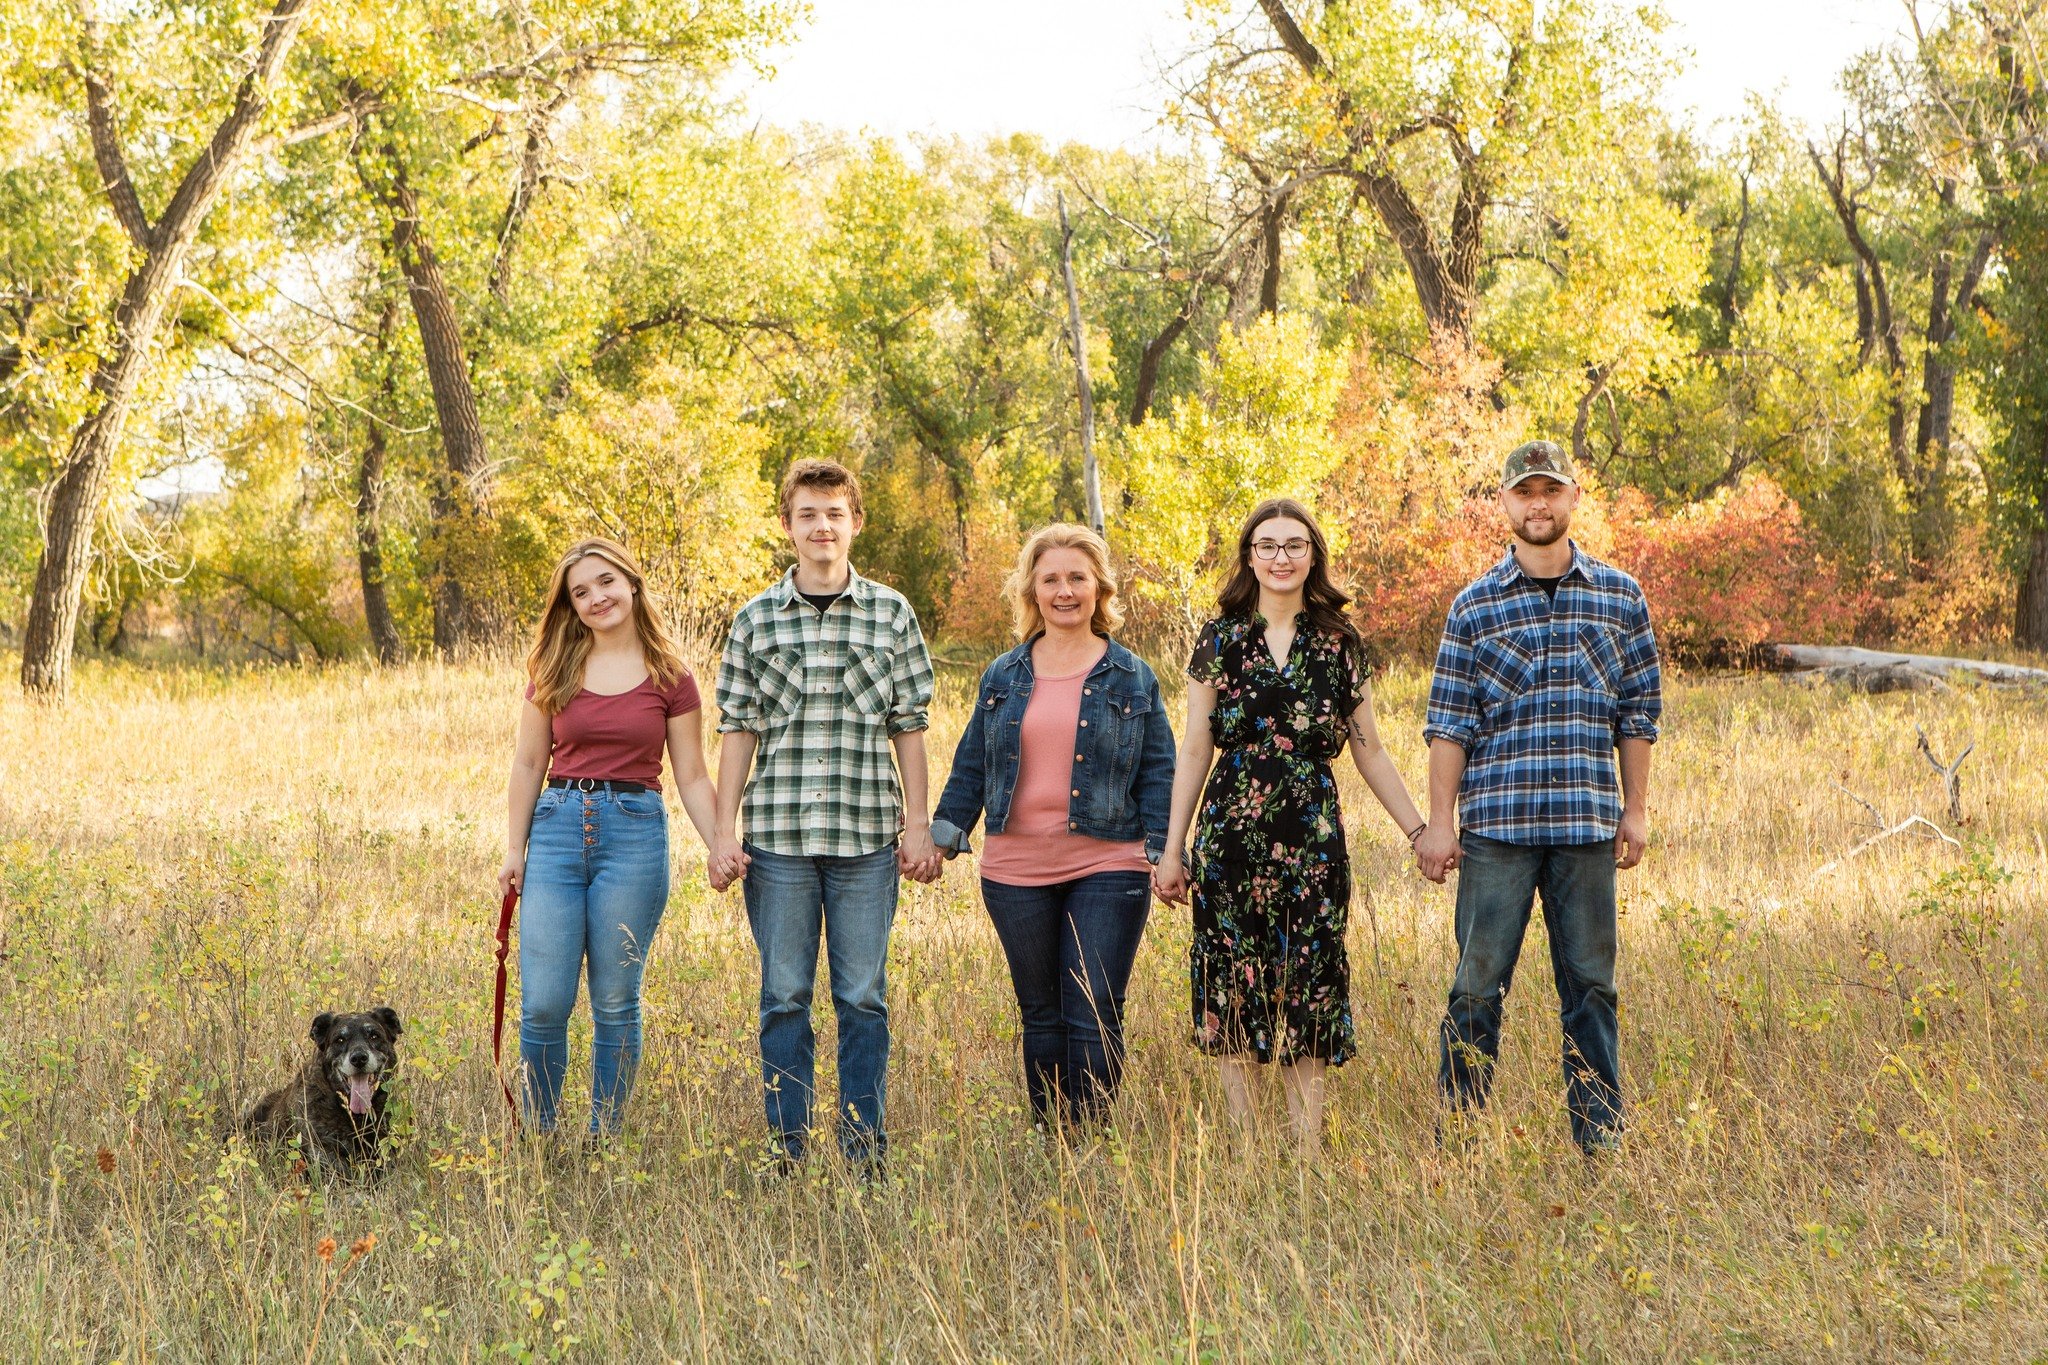 Need to update your family photo? Book early and start planning today!
#lethbridgephotographer #yqlphotography #familyphotosession #makingmemories